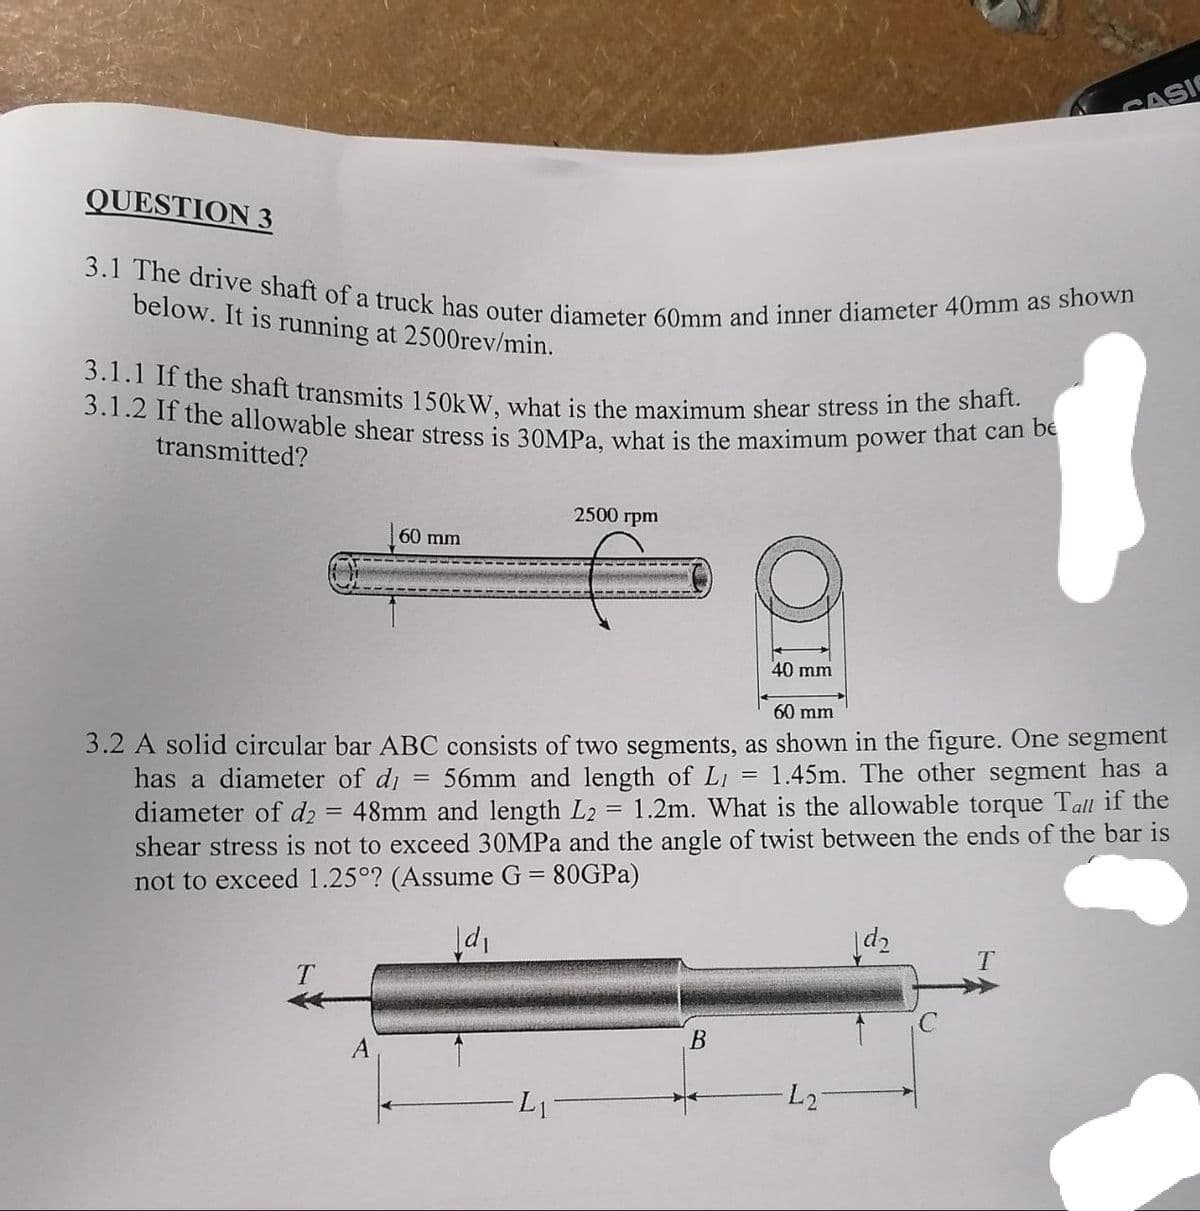 3.1.1 If the shaft transmits 150kW, what is the maximum shear stress in the shaft.
3.1 The drive shaft of a truck has outer diameter 60mm and inner diameter 40mm as shown
3.1.2 If the allowable shear stress is 30MPA, what is the maximum power that can be
CASI
QUESTION 3
below. It is running at 2500rev/min.
transmitted?
2500 грm
60 mm
40 mm
60 mm
3.2 A solid circular bar ABC consists of two segments, as shown in the figure. One segment
has a diameter of di = 56mm and length of LI
diameter of d2
1.45m. The other segment has a
48mm and length L2 = 1.2m. What is the allowable torque Tall if the
shear stress is not to exceed 30MPA and the angle of twist between the ends of the bar is
not to exceed 1.25°? (Assume G = 80GPA)
!!
L1
